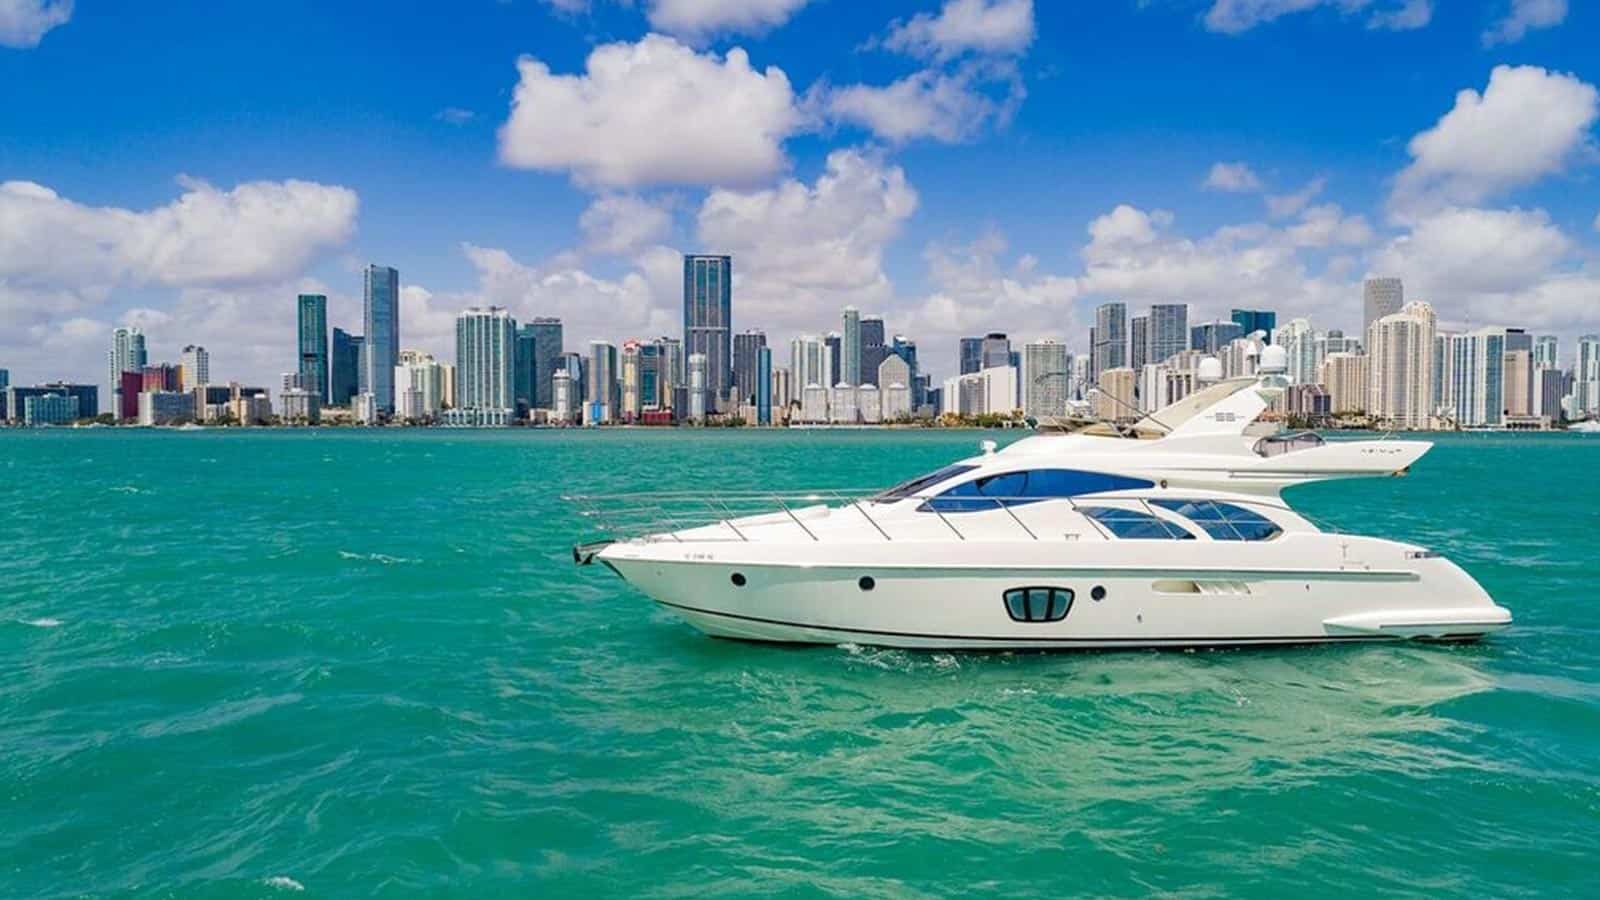 How Much To Rent A Yacht In Miami